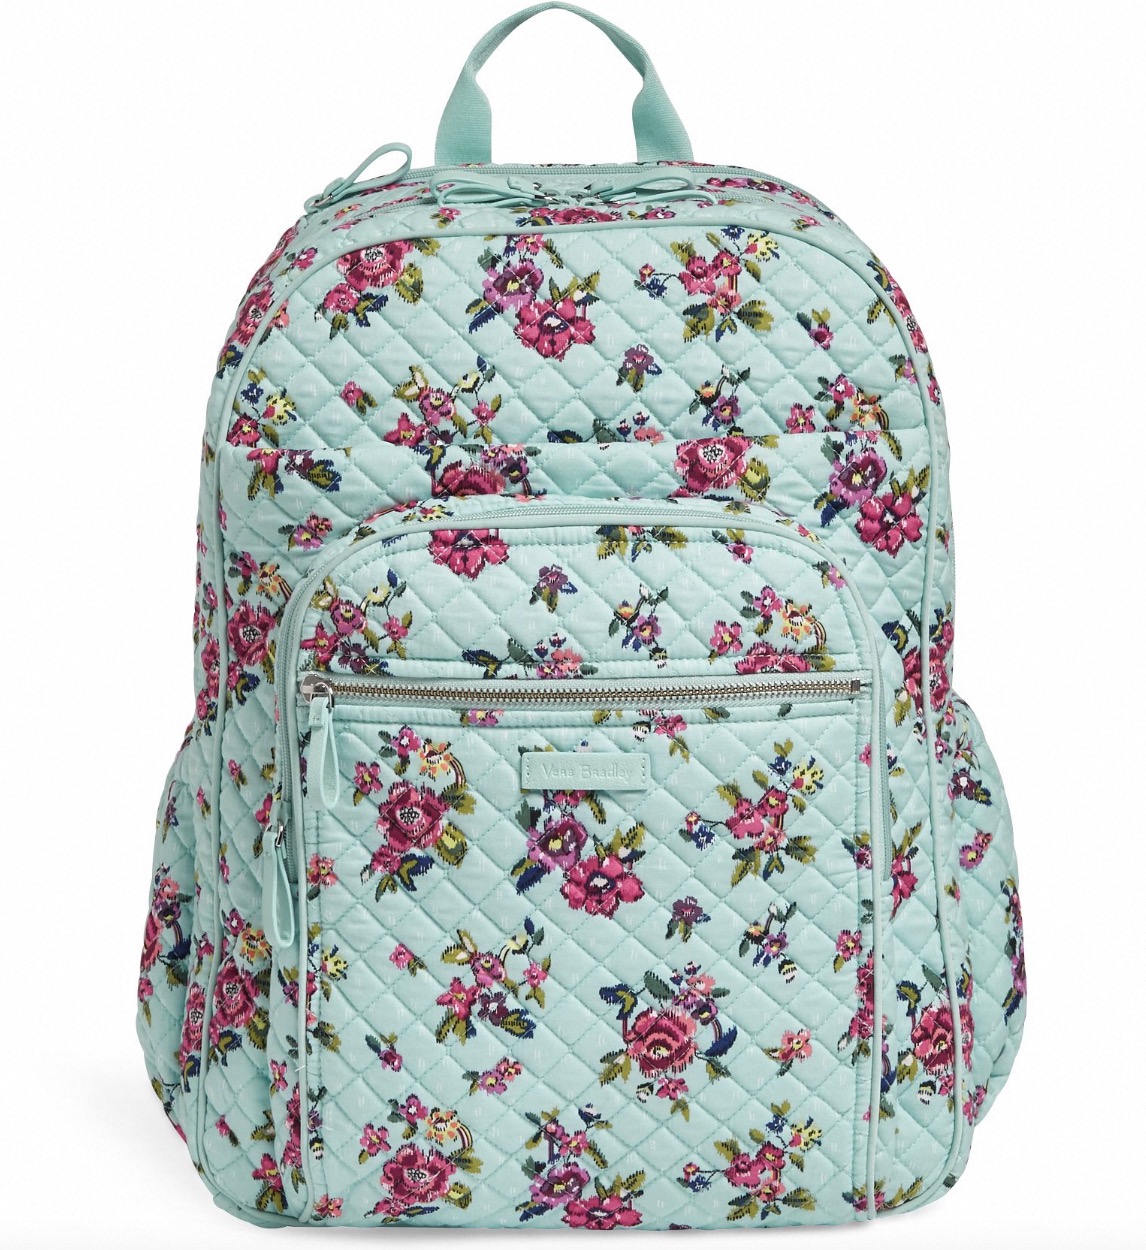 Vera Bradley Backpacks: Functional Fashion for Every Day插图3